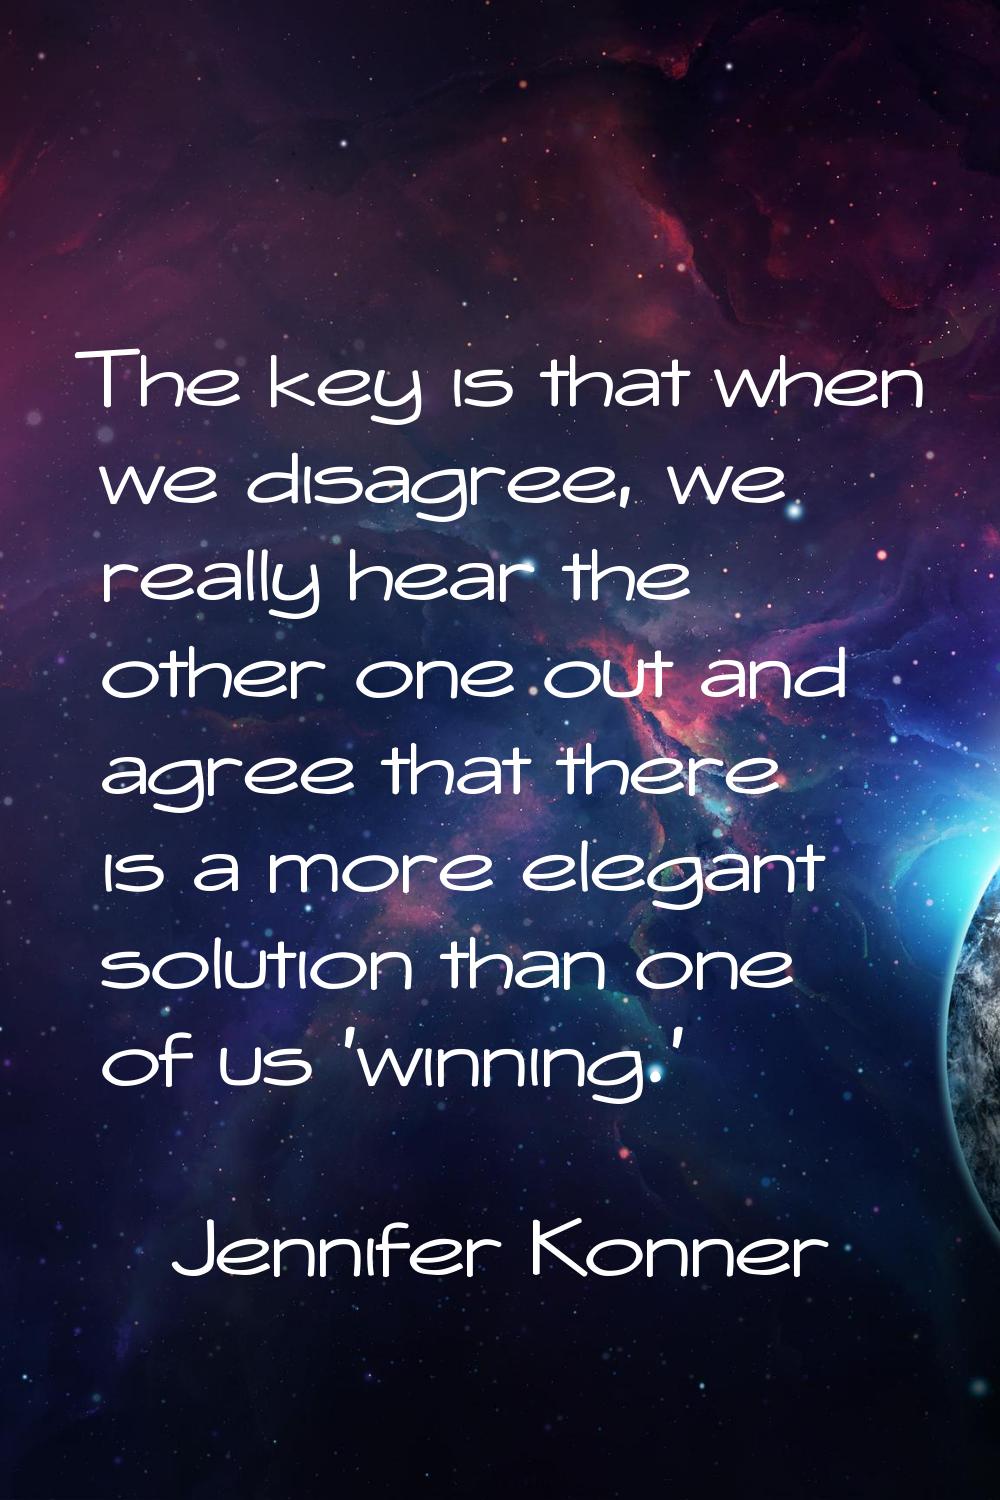 The key is that when we disagree, we really hear the other one out and agree that there is a more e